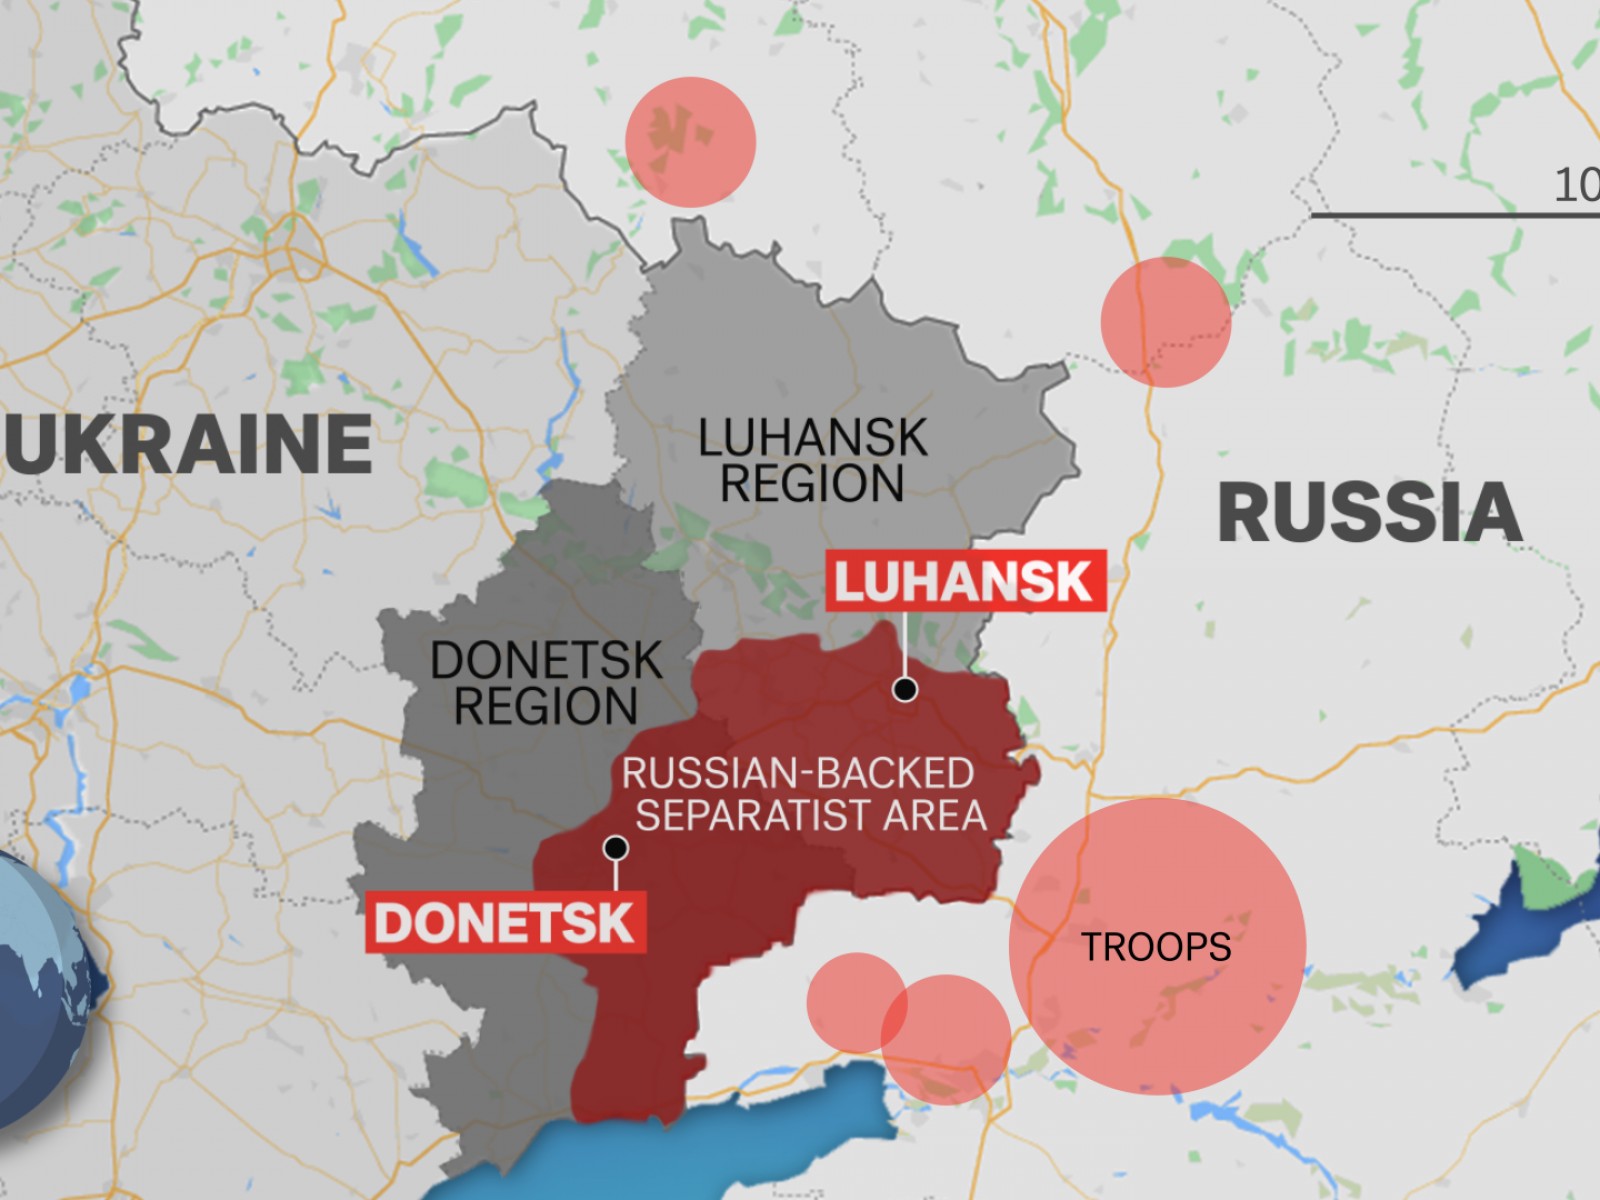 Putin put his signature on 4 unification treaties with the People’s Republics of Donetsk and Luhansk